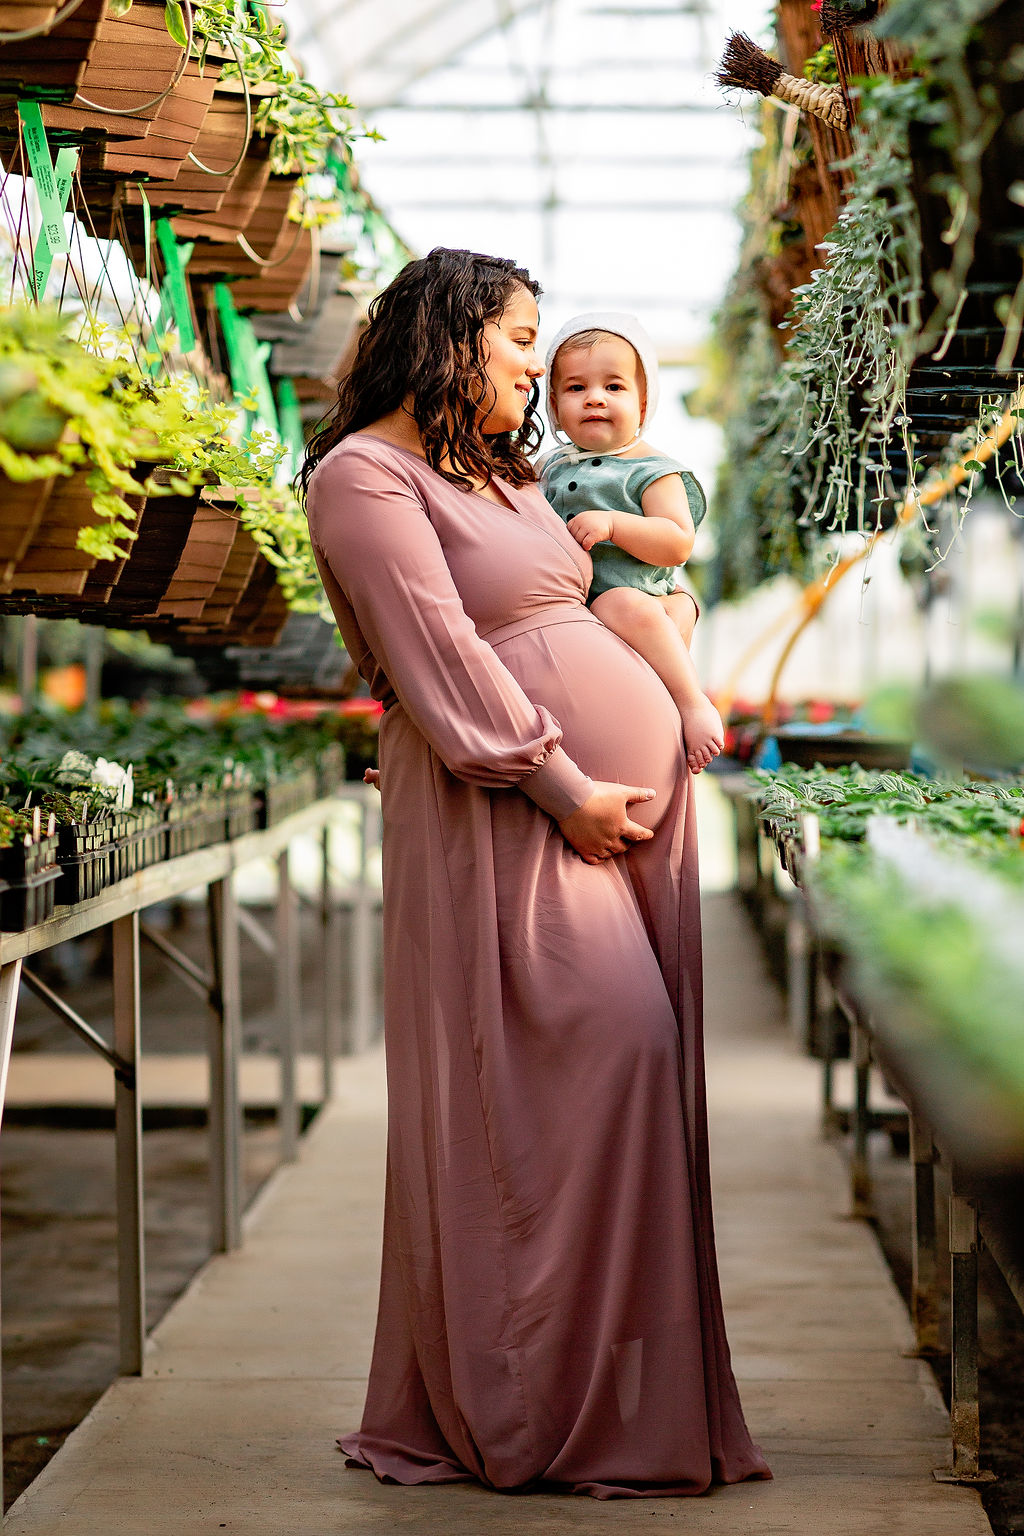 A mother to be browses a greenhouse aisle in a purple maternity gown while holding her toddler son marshall midwifery